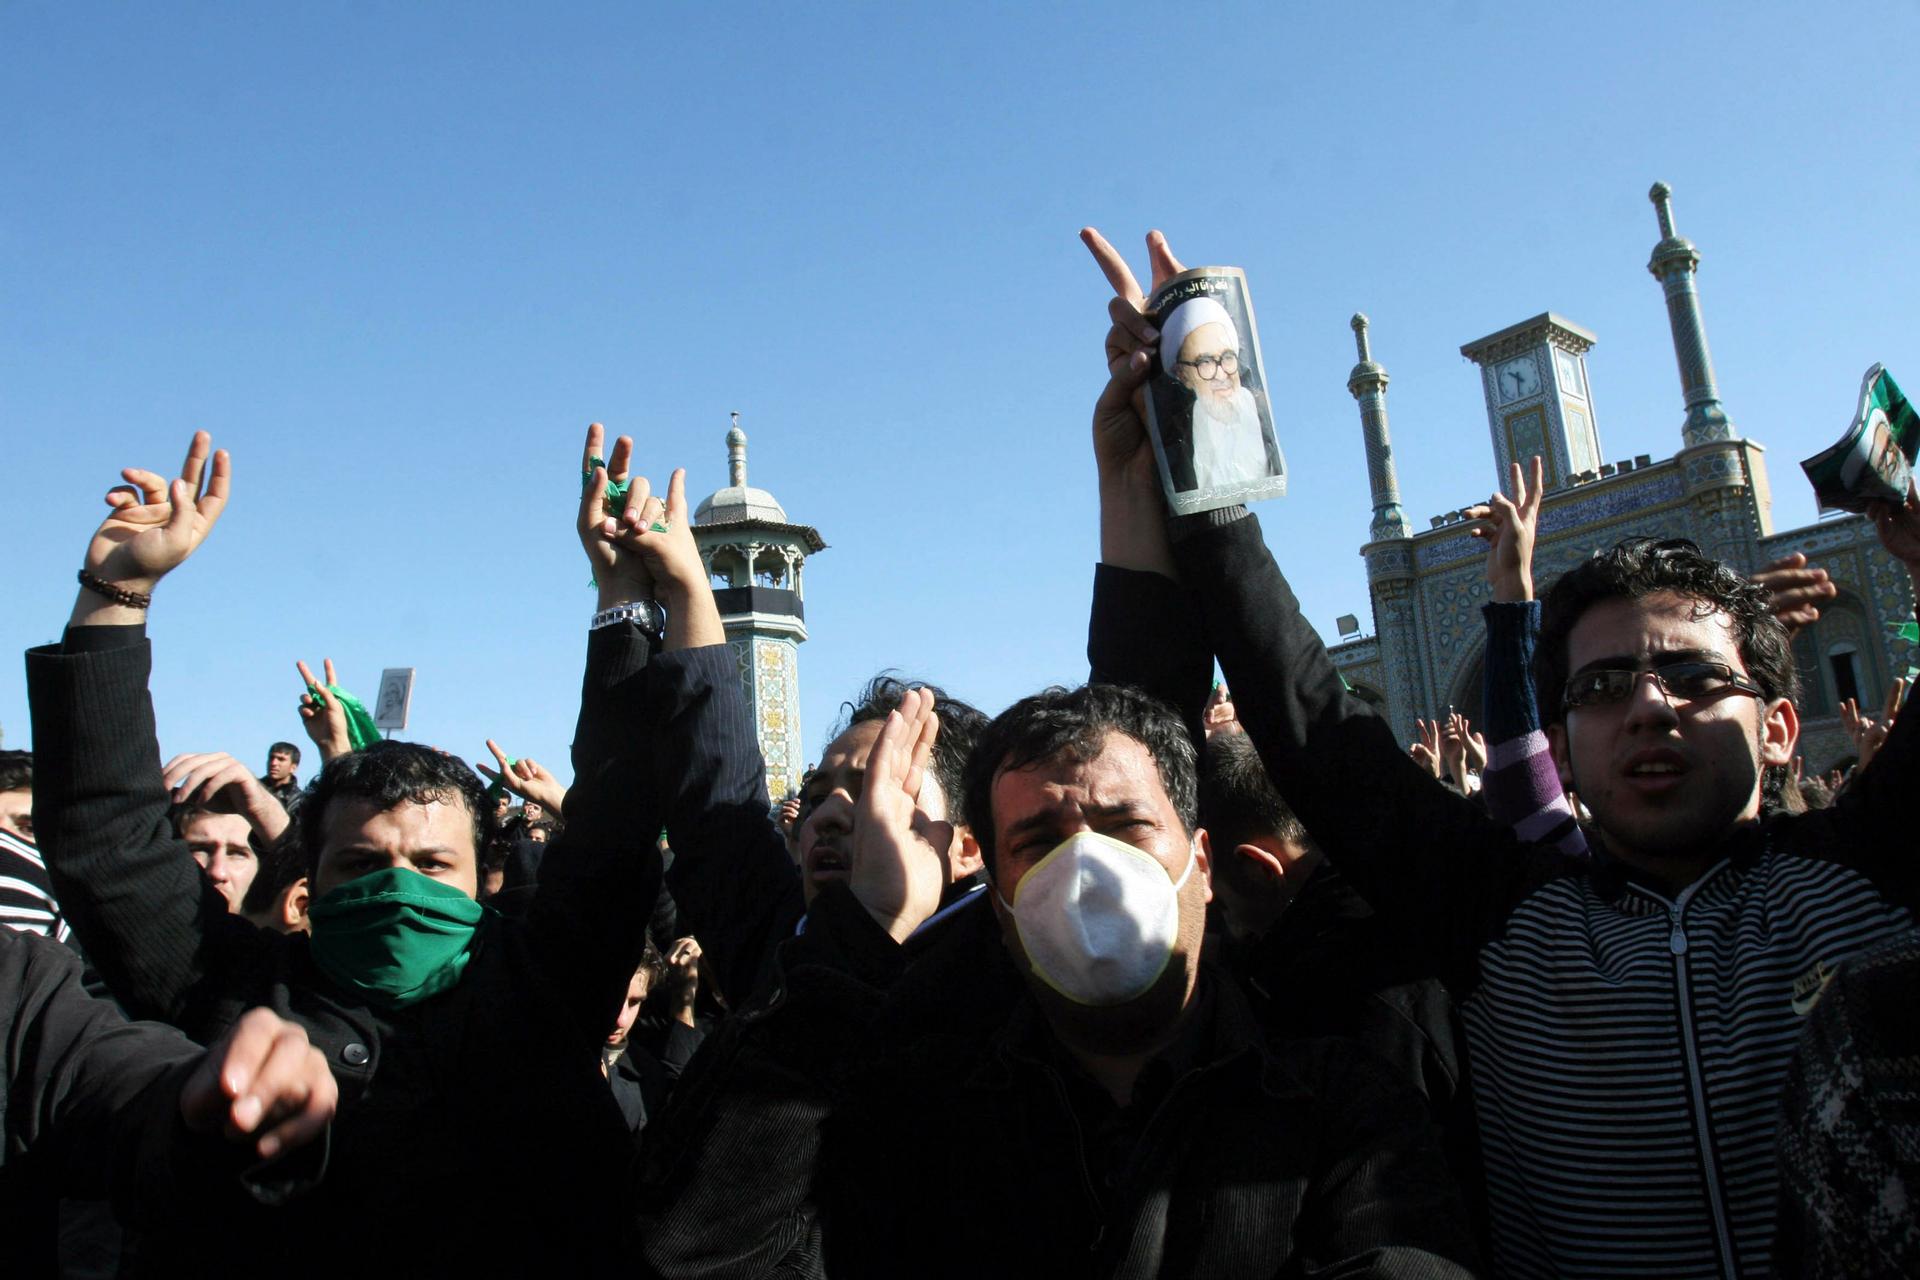 People wear green bands in support of the Iranian opposition movement during the funeral of dissident Iranian cleric Grand Ayatollah Hossein Ali Montazeri in the holy city of Qom on December 21, 2009.